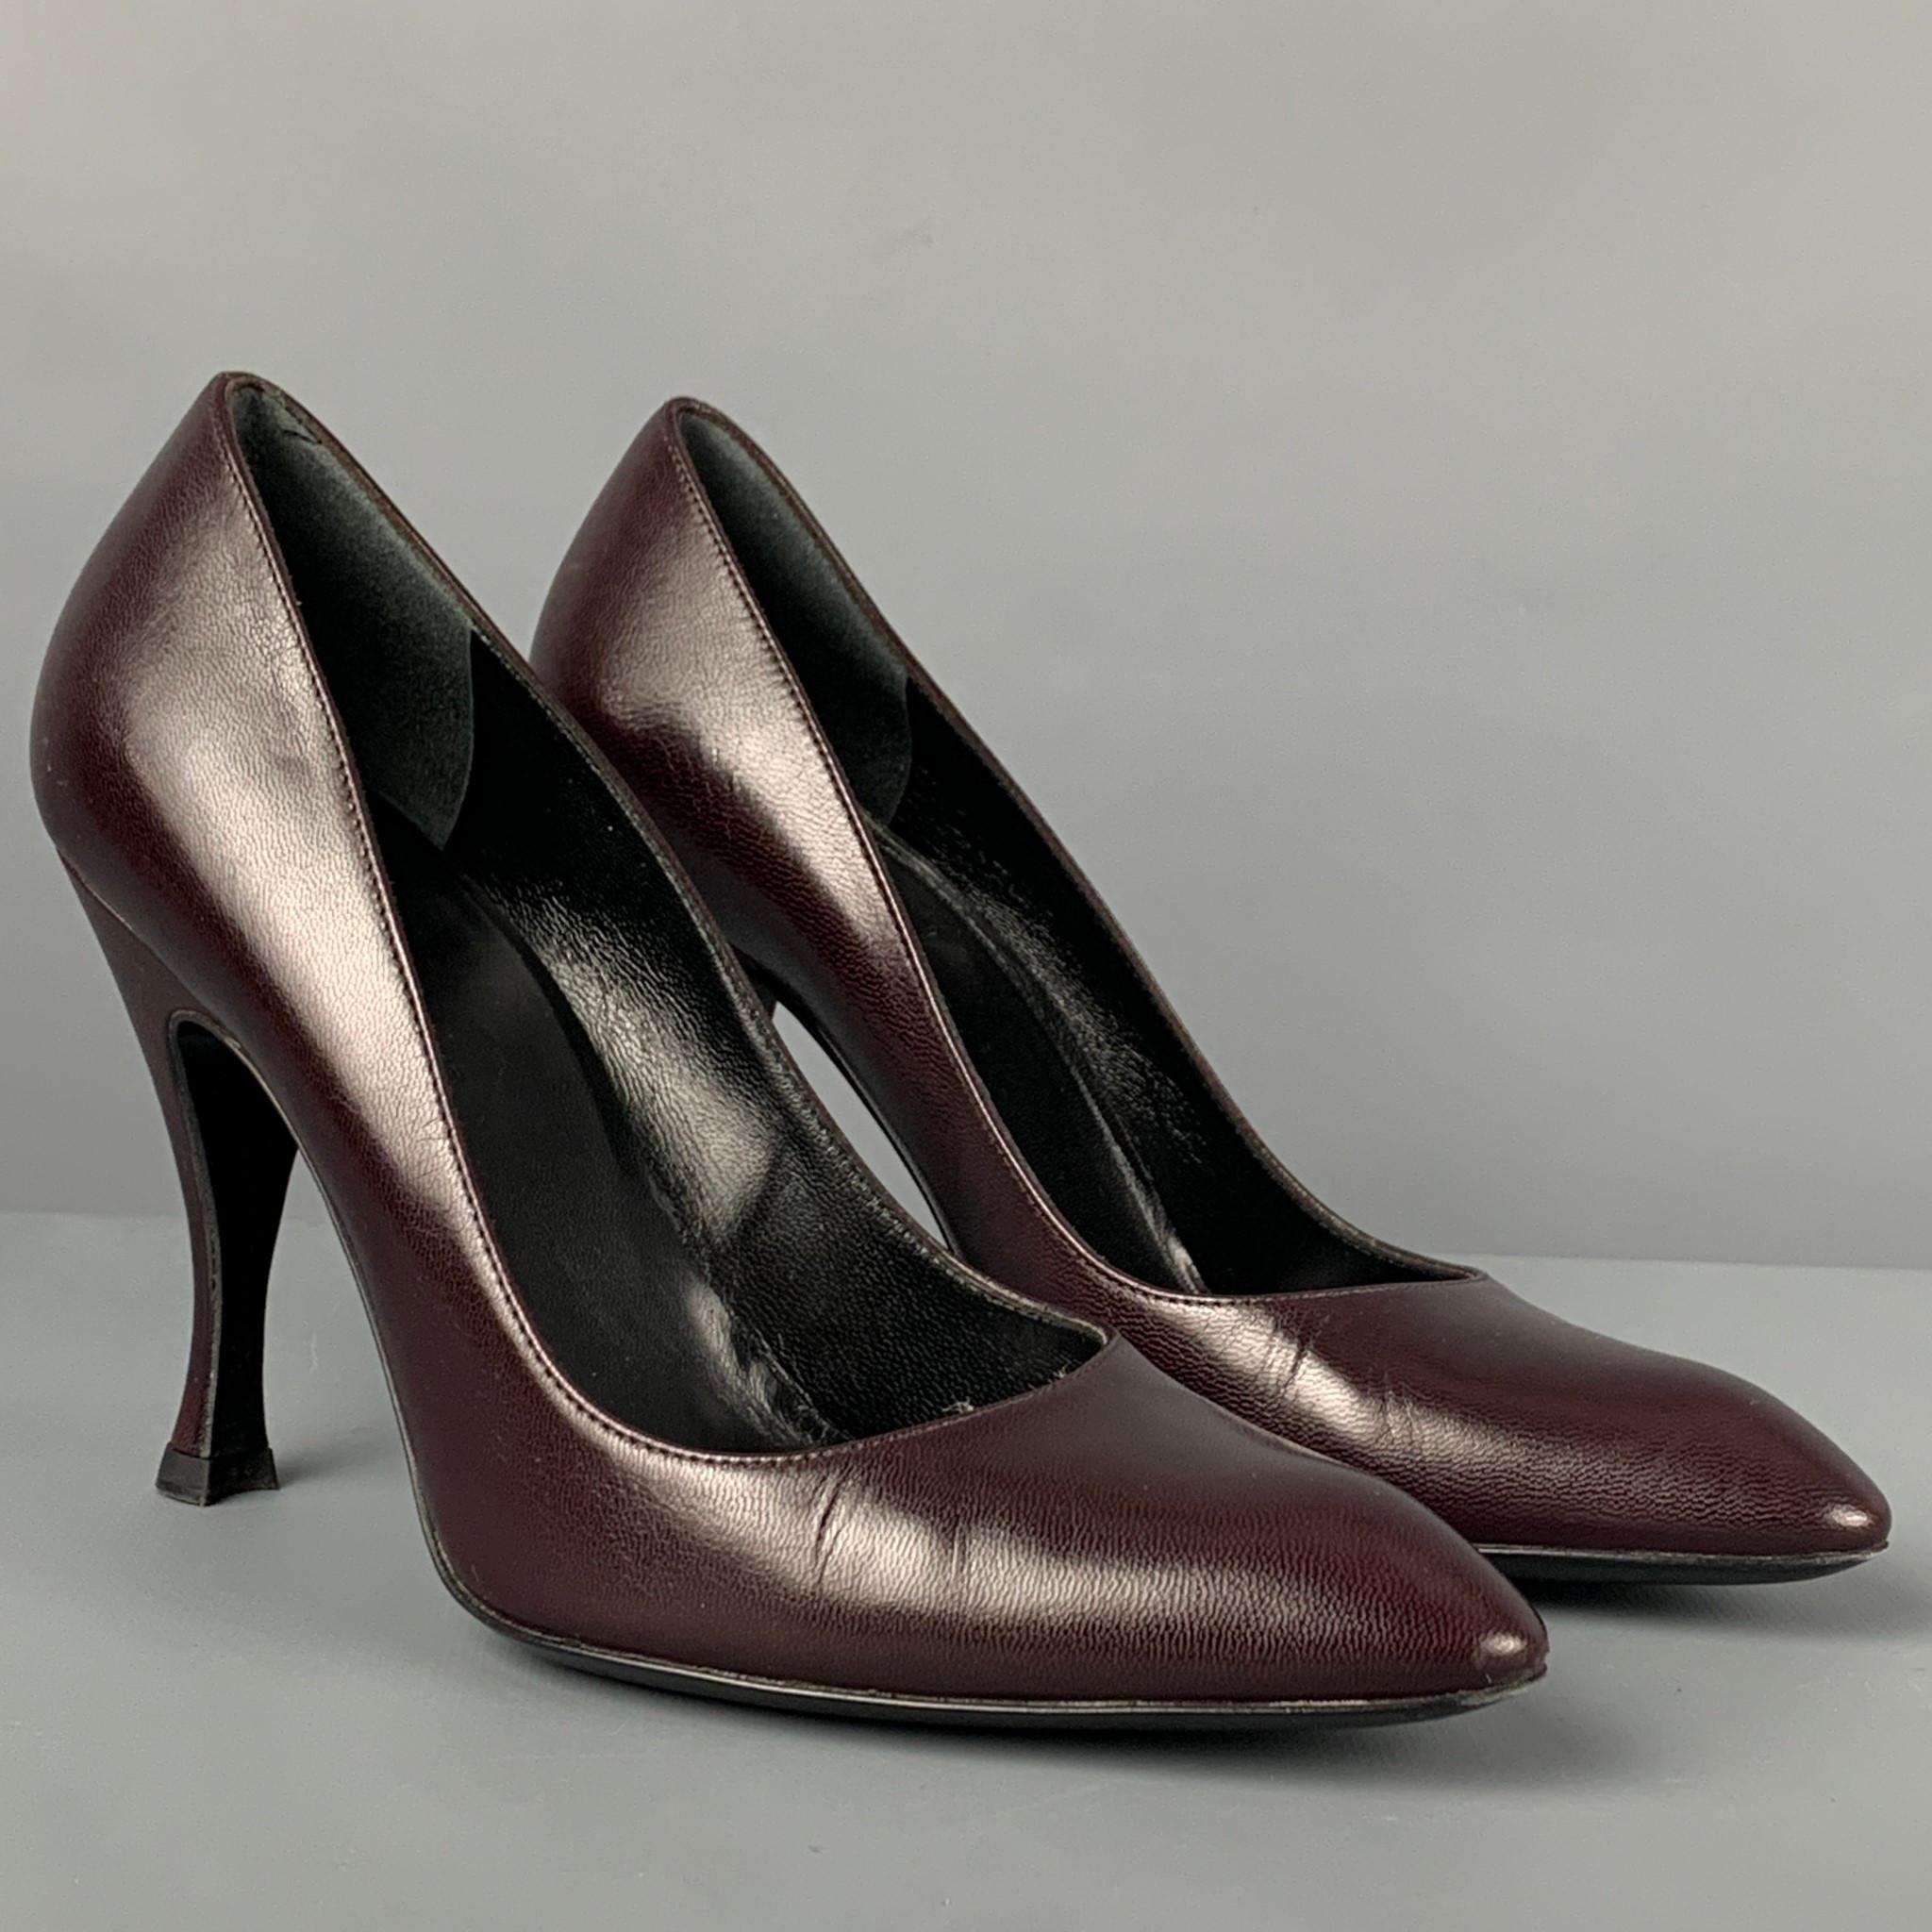 BALENCIAGA pumps comes in a dark burgundy leather featuring a classic style, pointed toe, and a stiletto heel. Comes with box. Made in Italy. 

Very Good Pre-Owned Condition.
Marked: 36
Original Retail Price: $950.0

Measurements:

Heel: 3.75 in. 